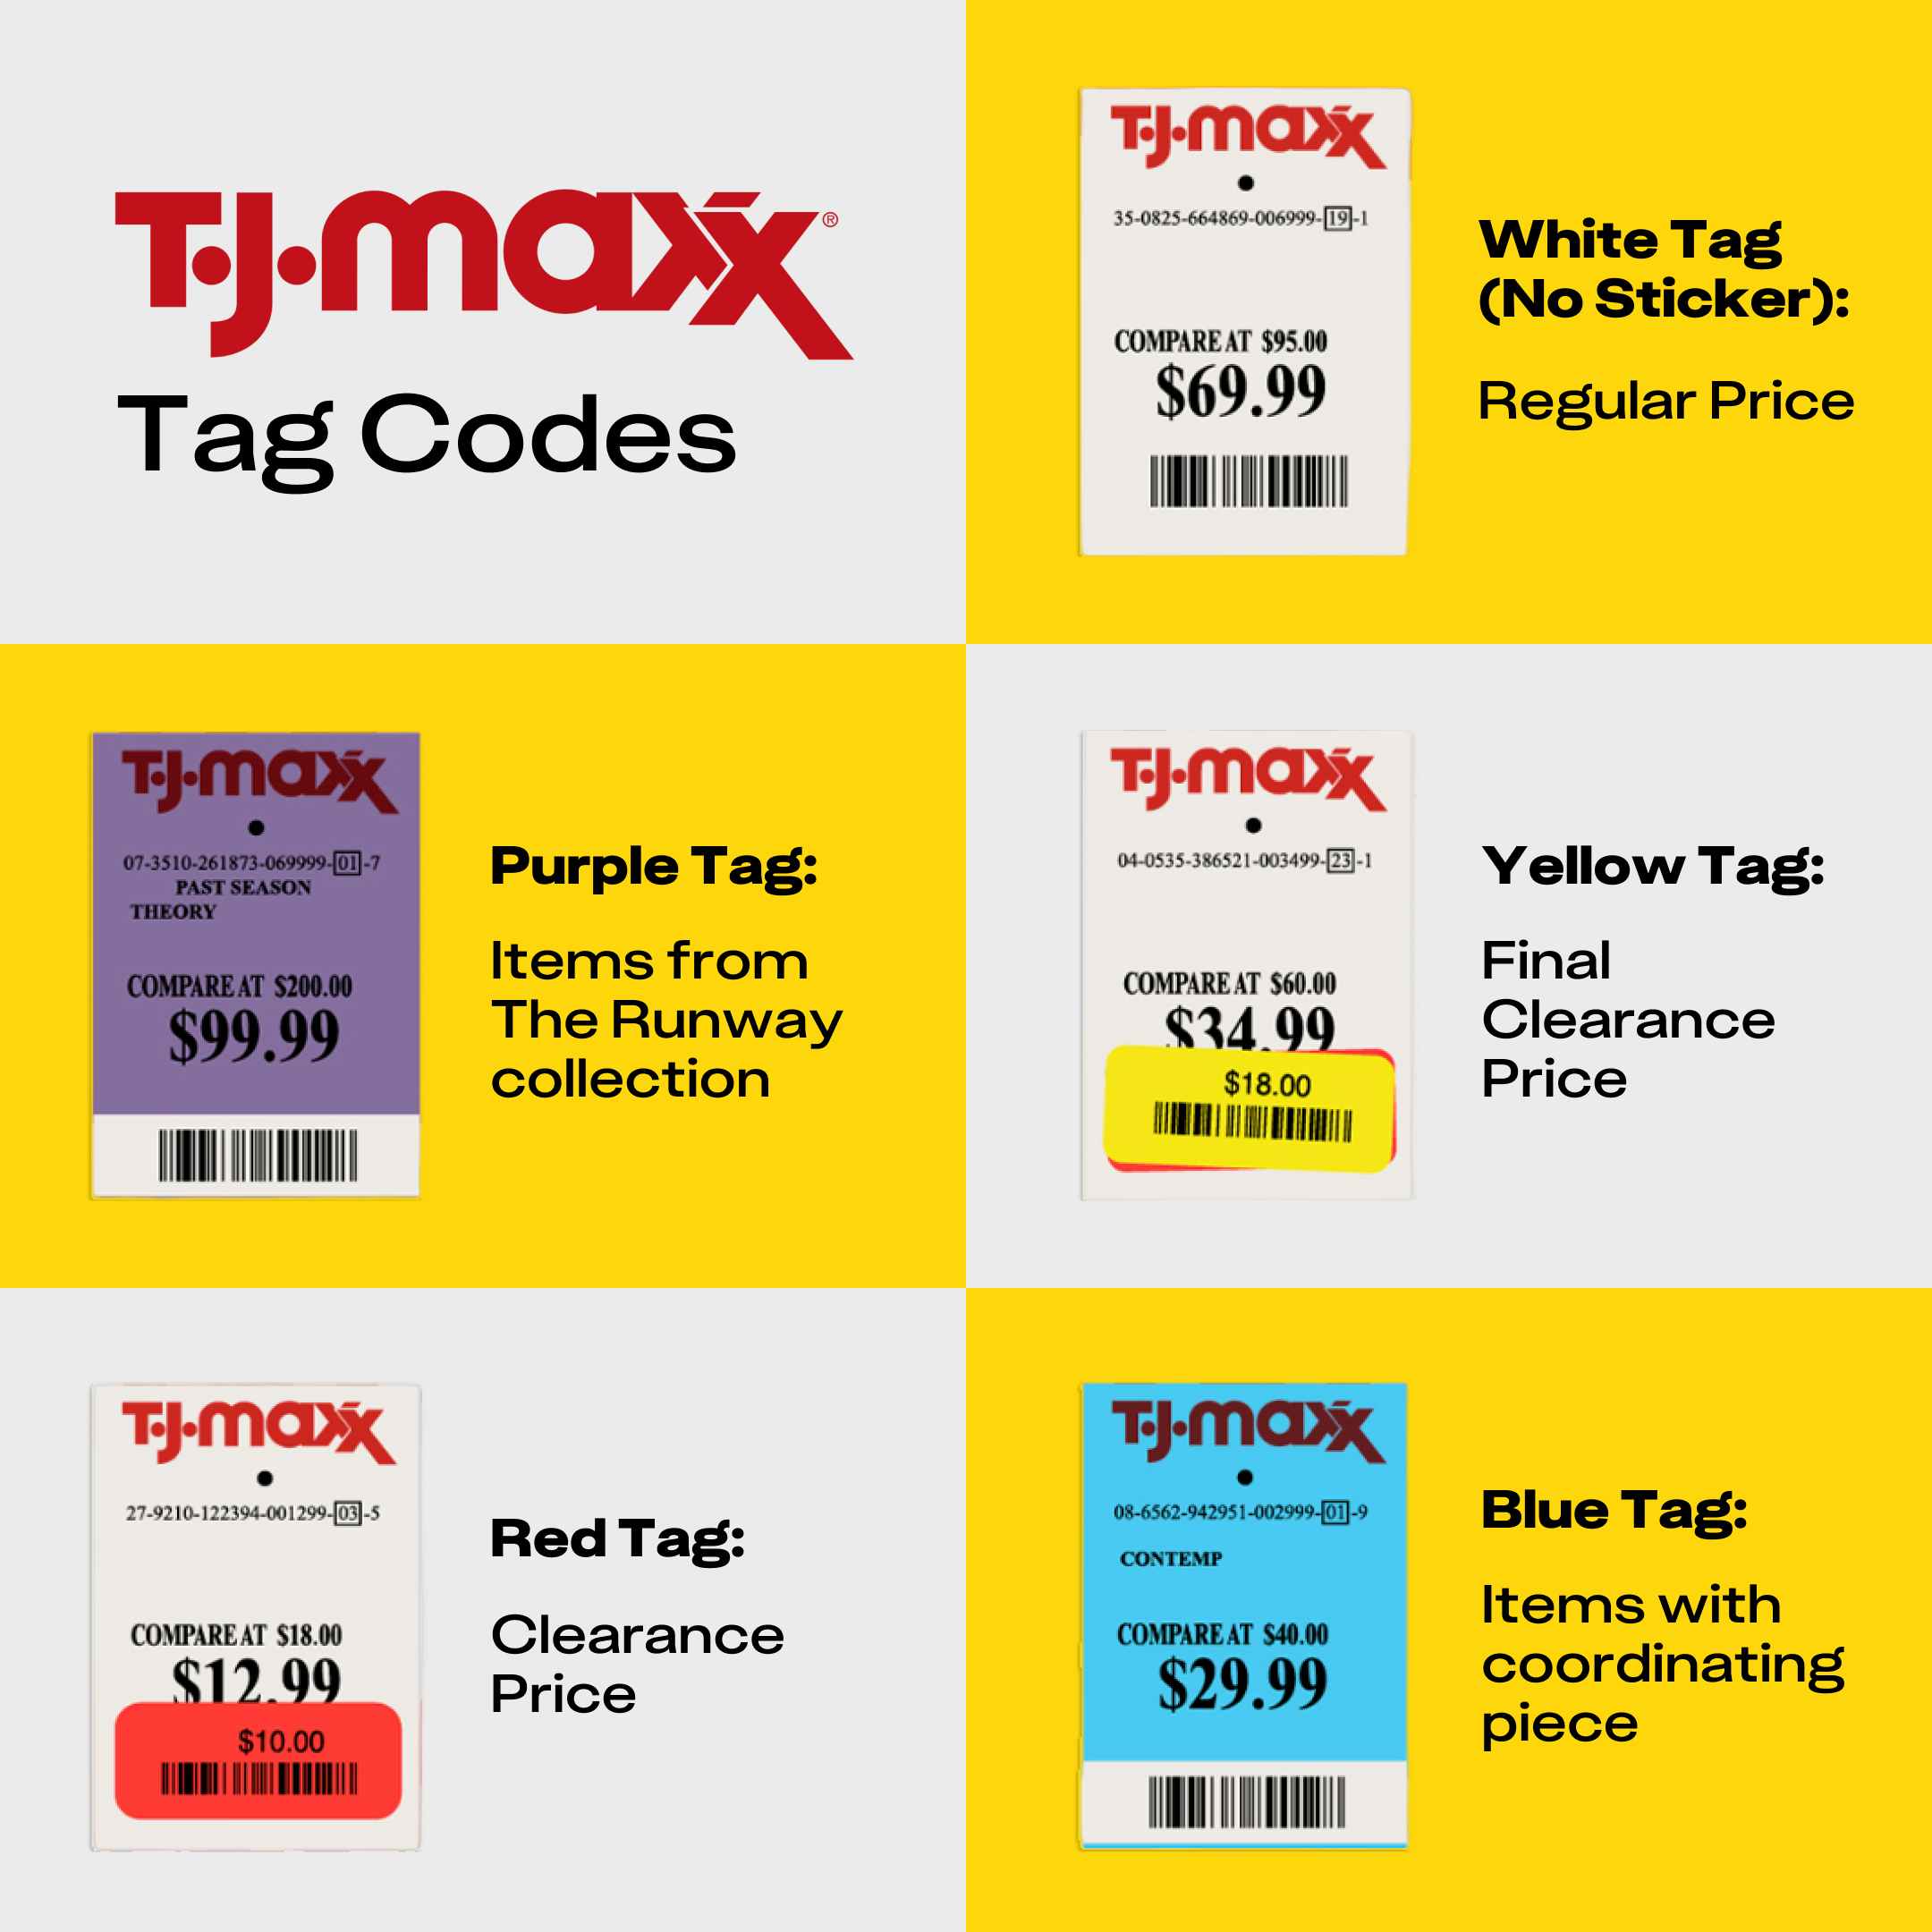 a guide for the different tjmaxx tags and stickers